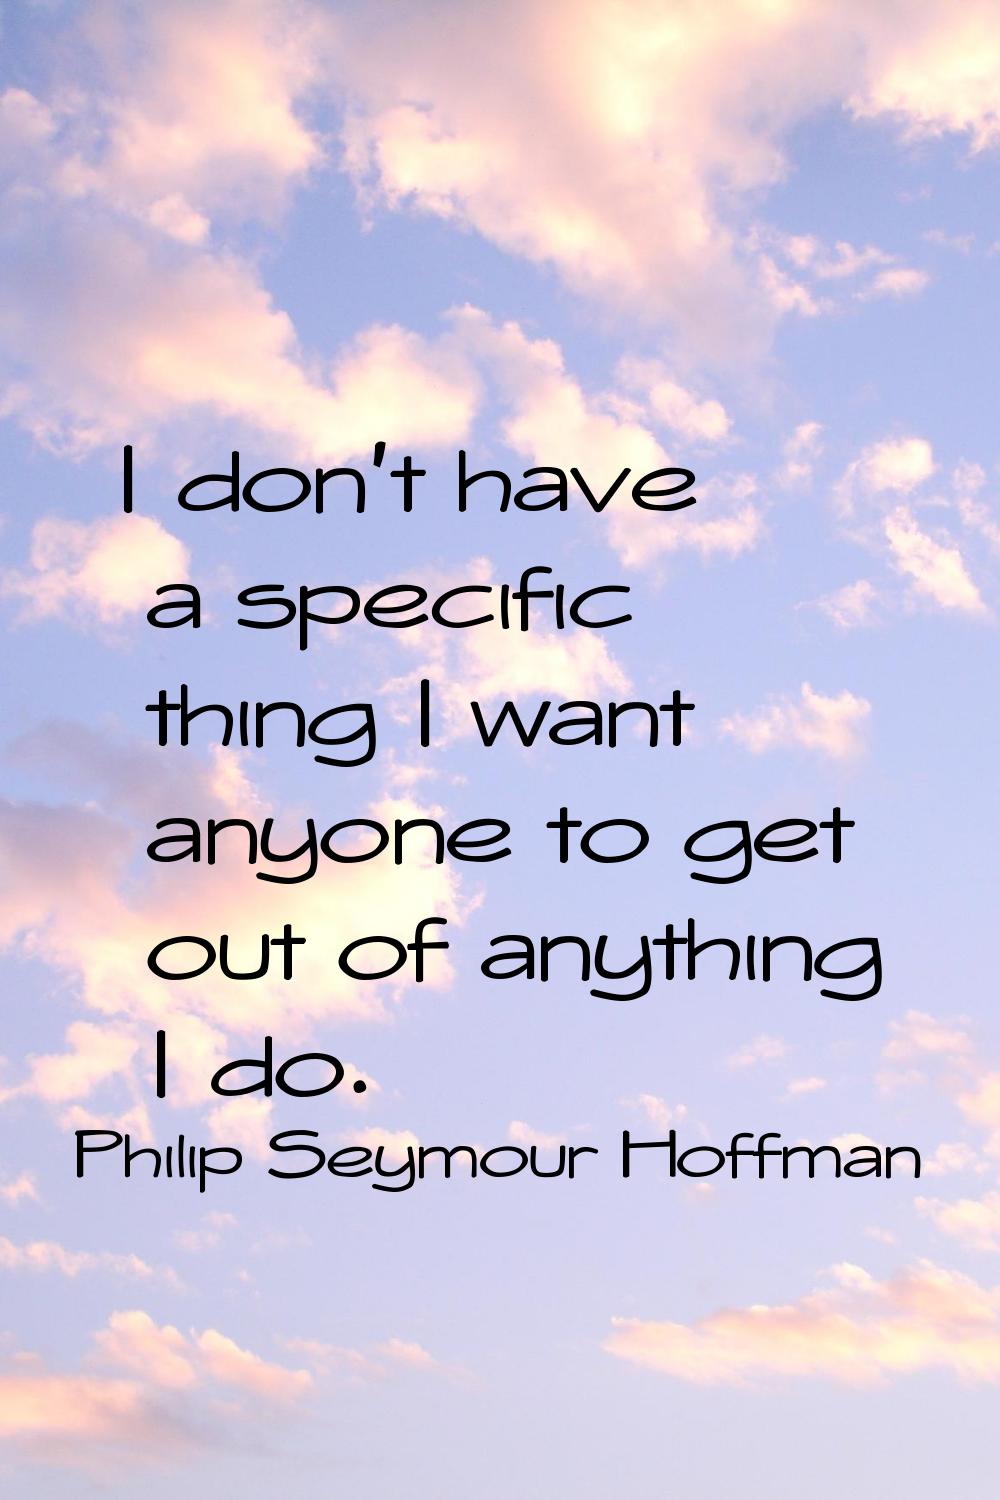 I don't have a specific thing I want anyone to get out of anything I do.